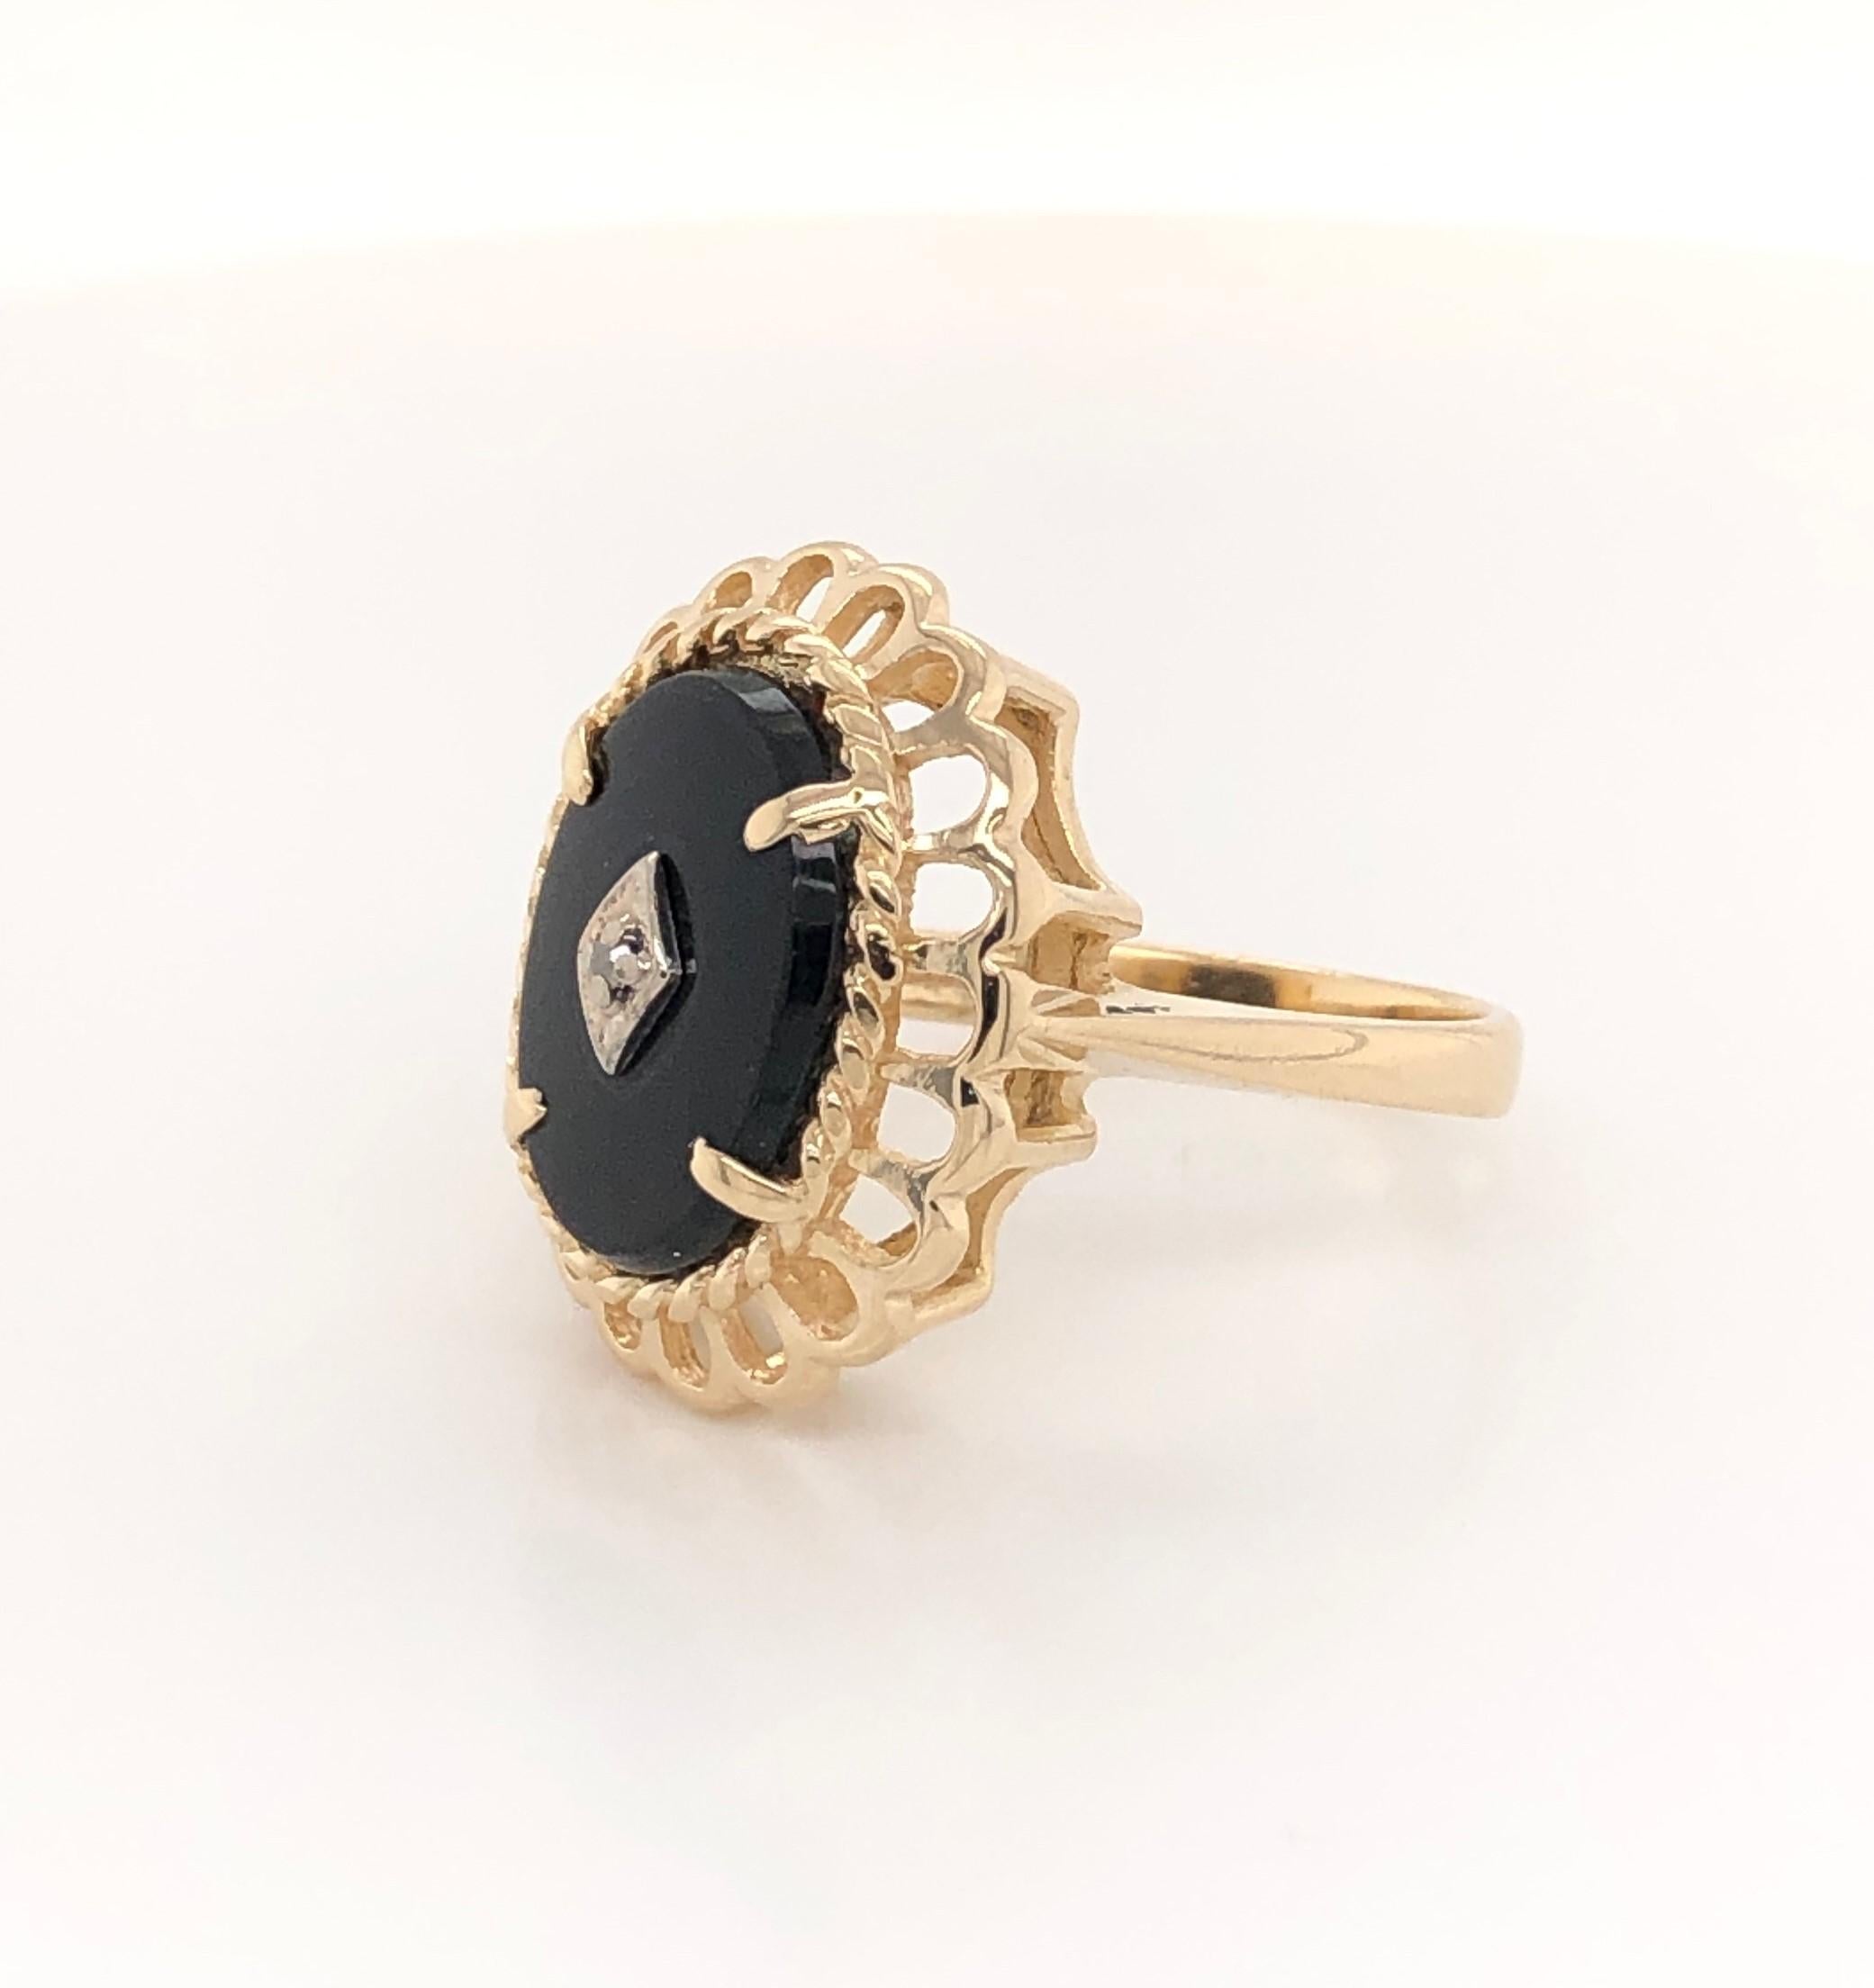 Women's Victorian Style Black Onyx Yellow Gold Oval Ring with Diamond Accent